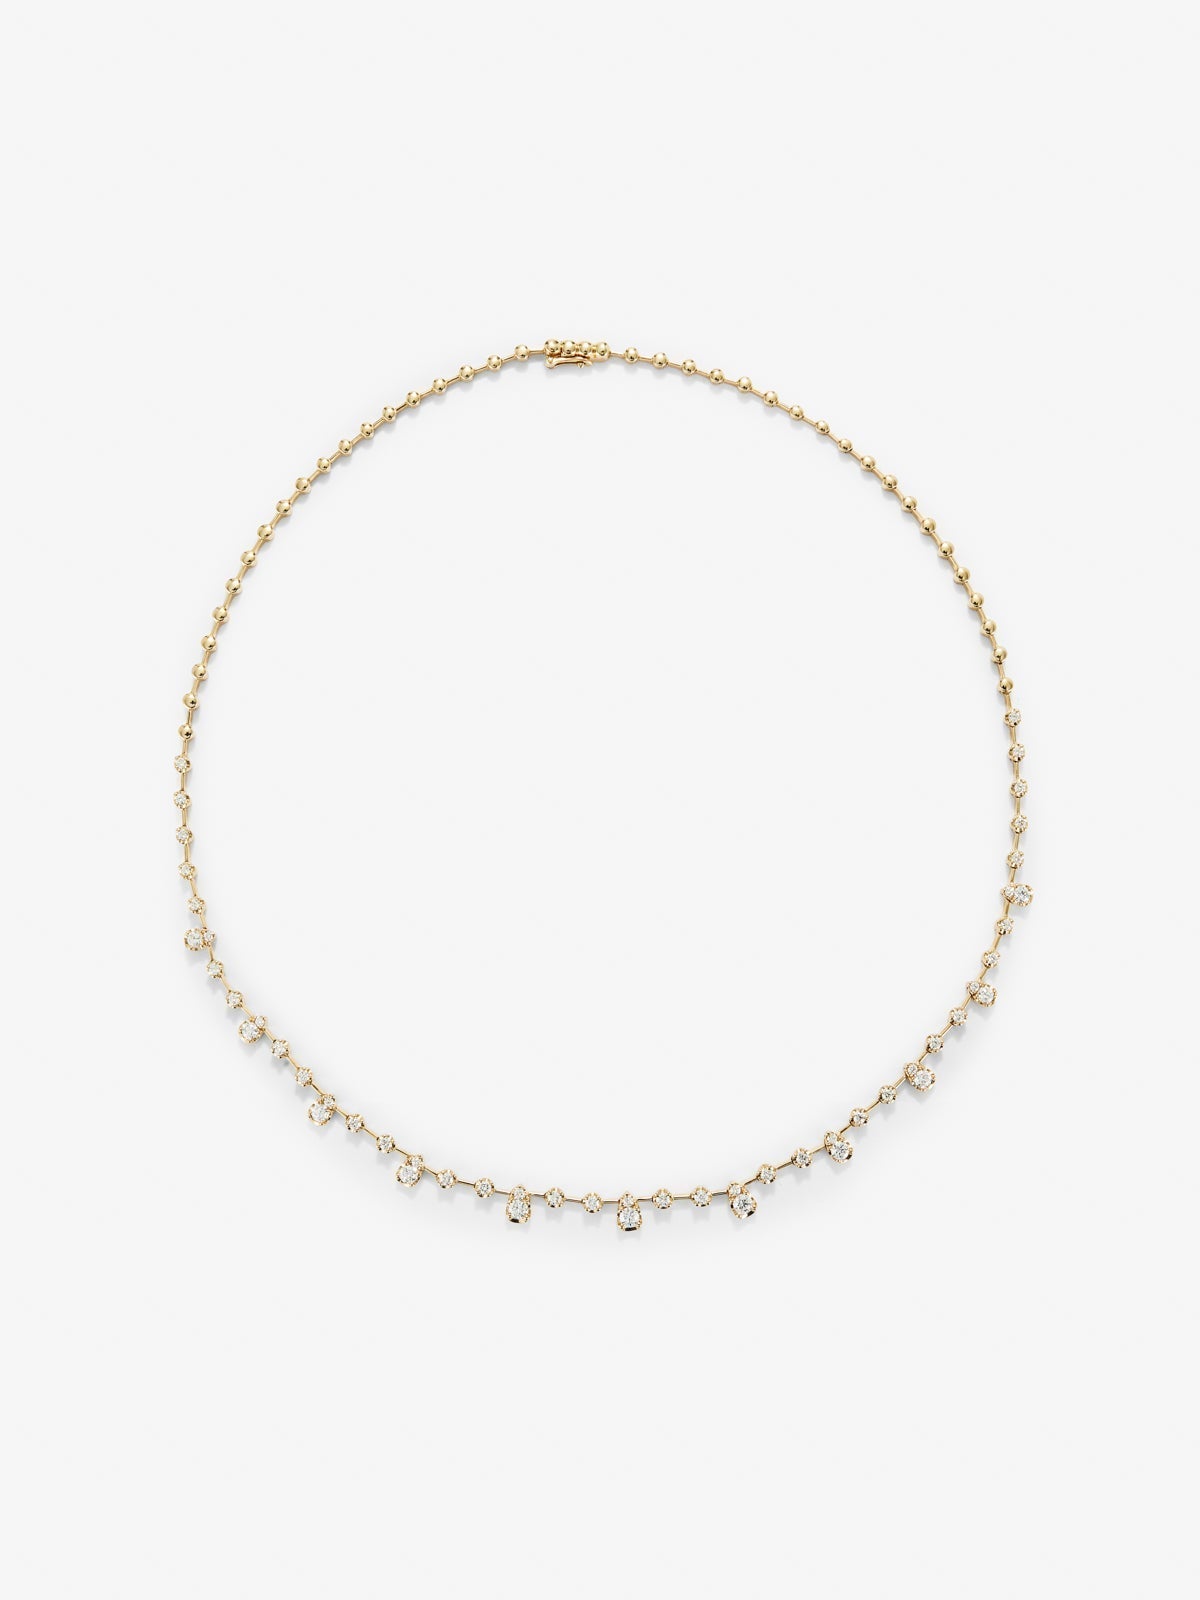 18K yellow gold necklace with 62 brilliant-cut diamonds with a total of 2.61 cts